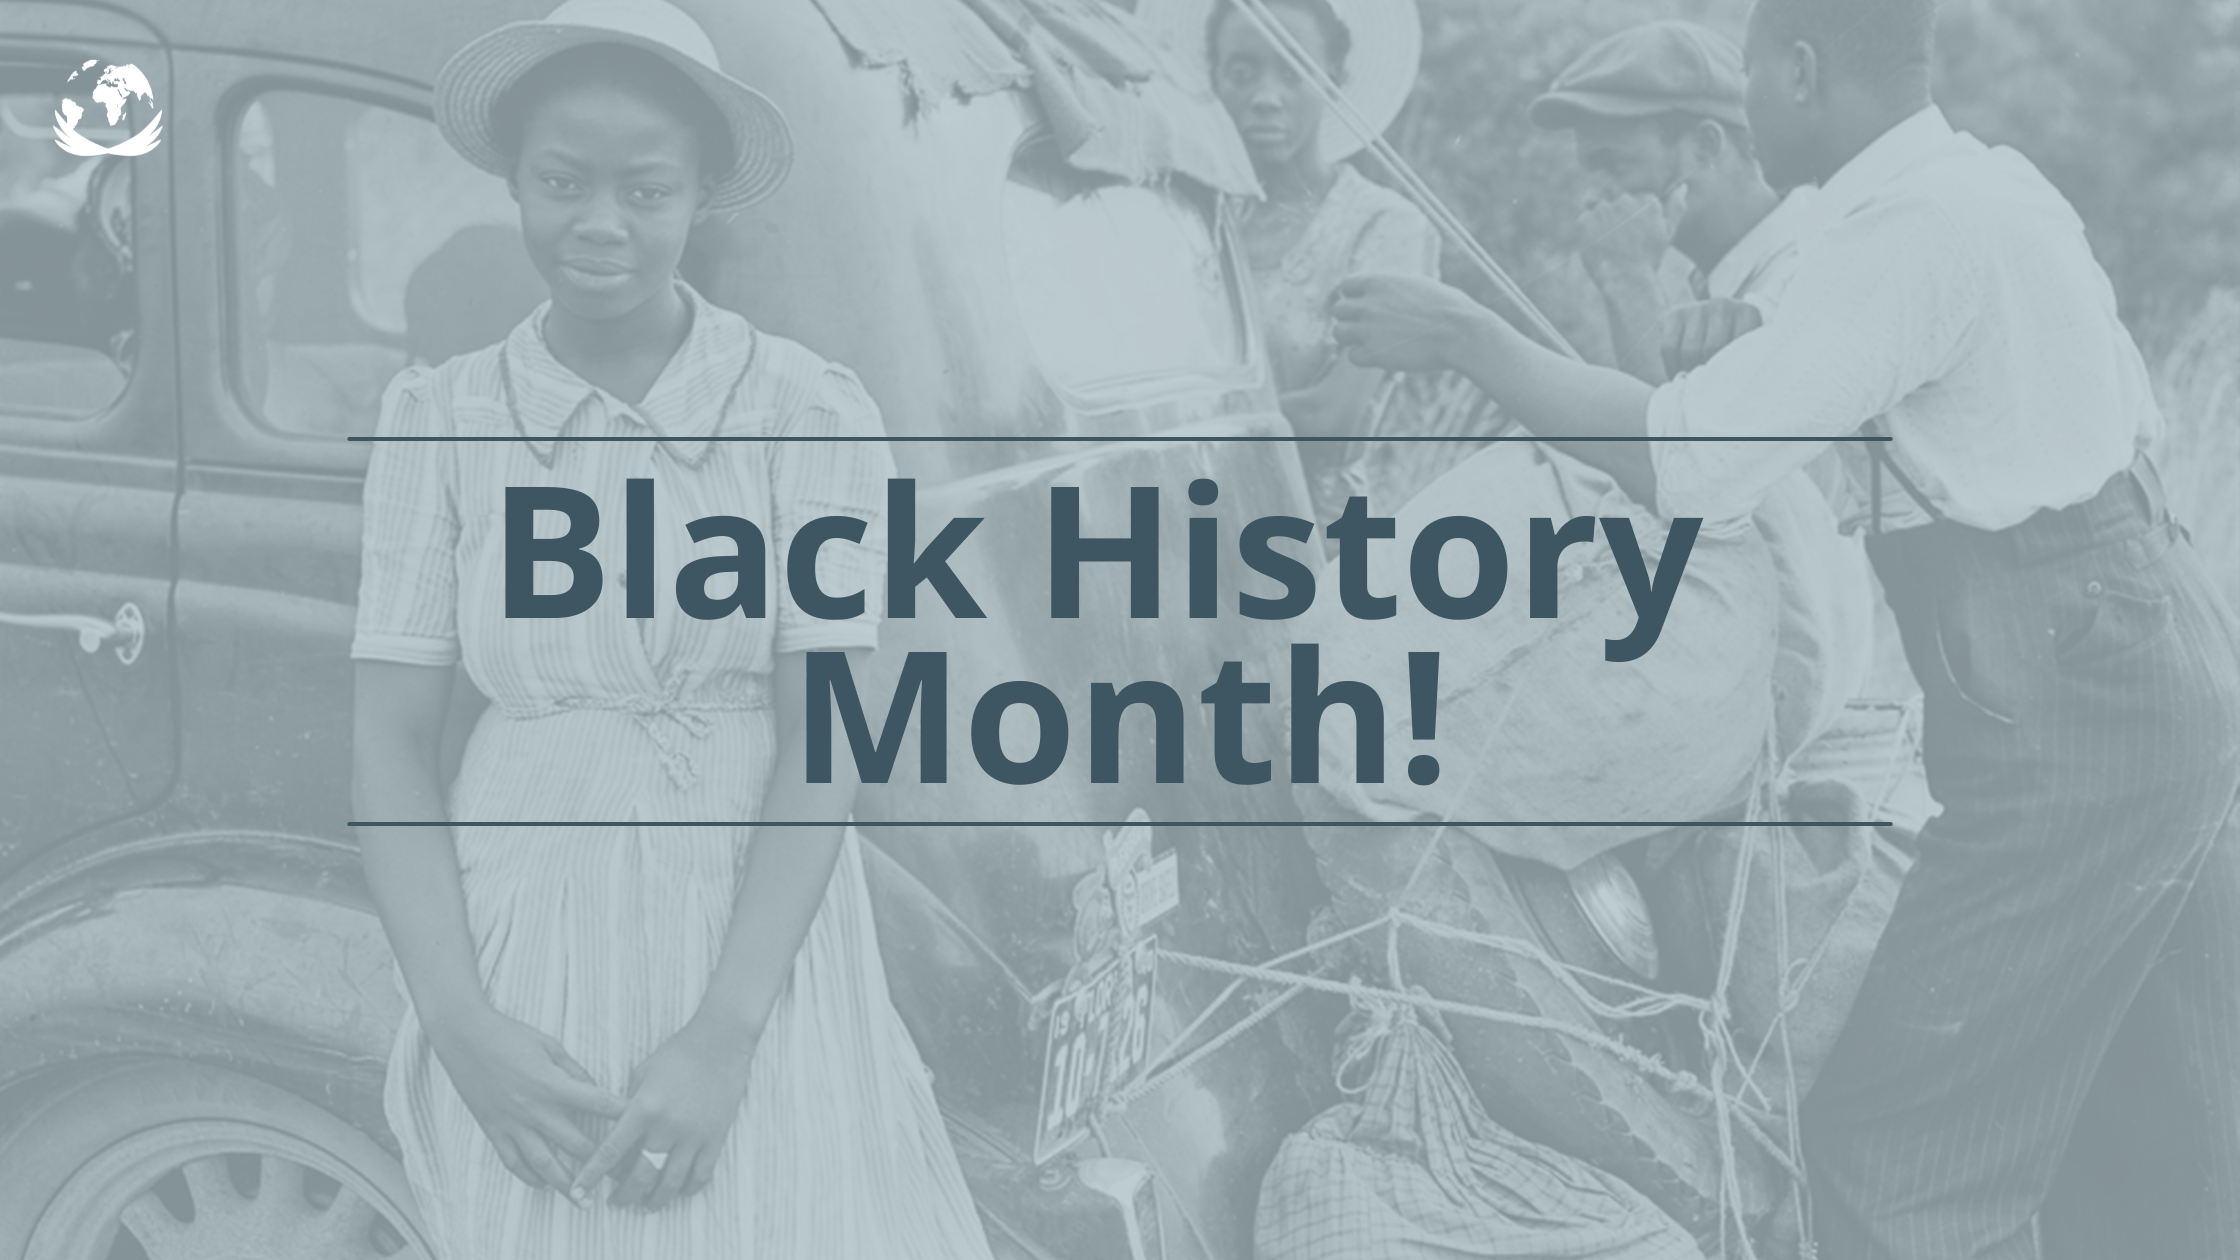 We are celebrating Black History Month!